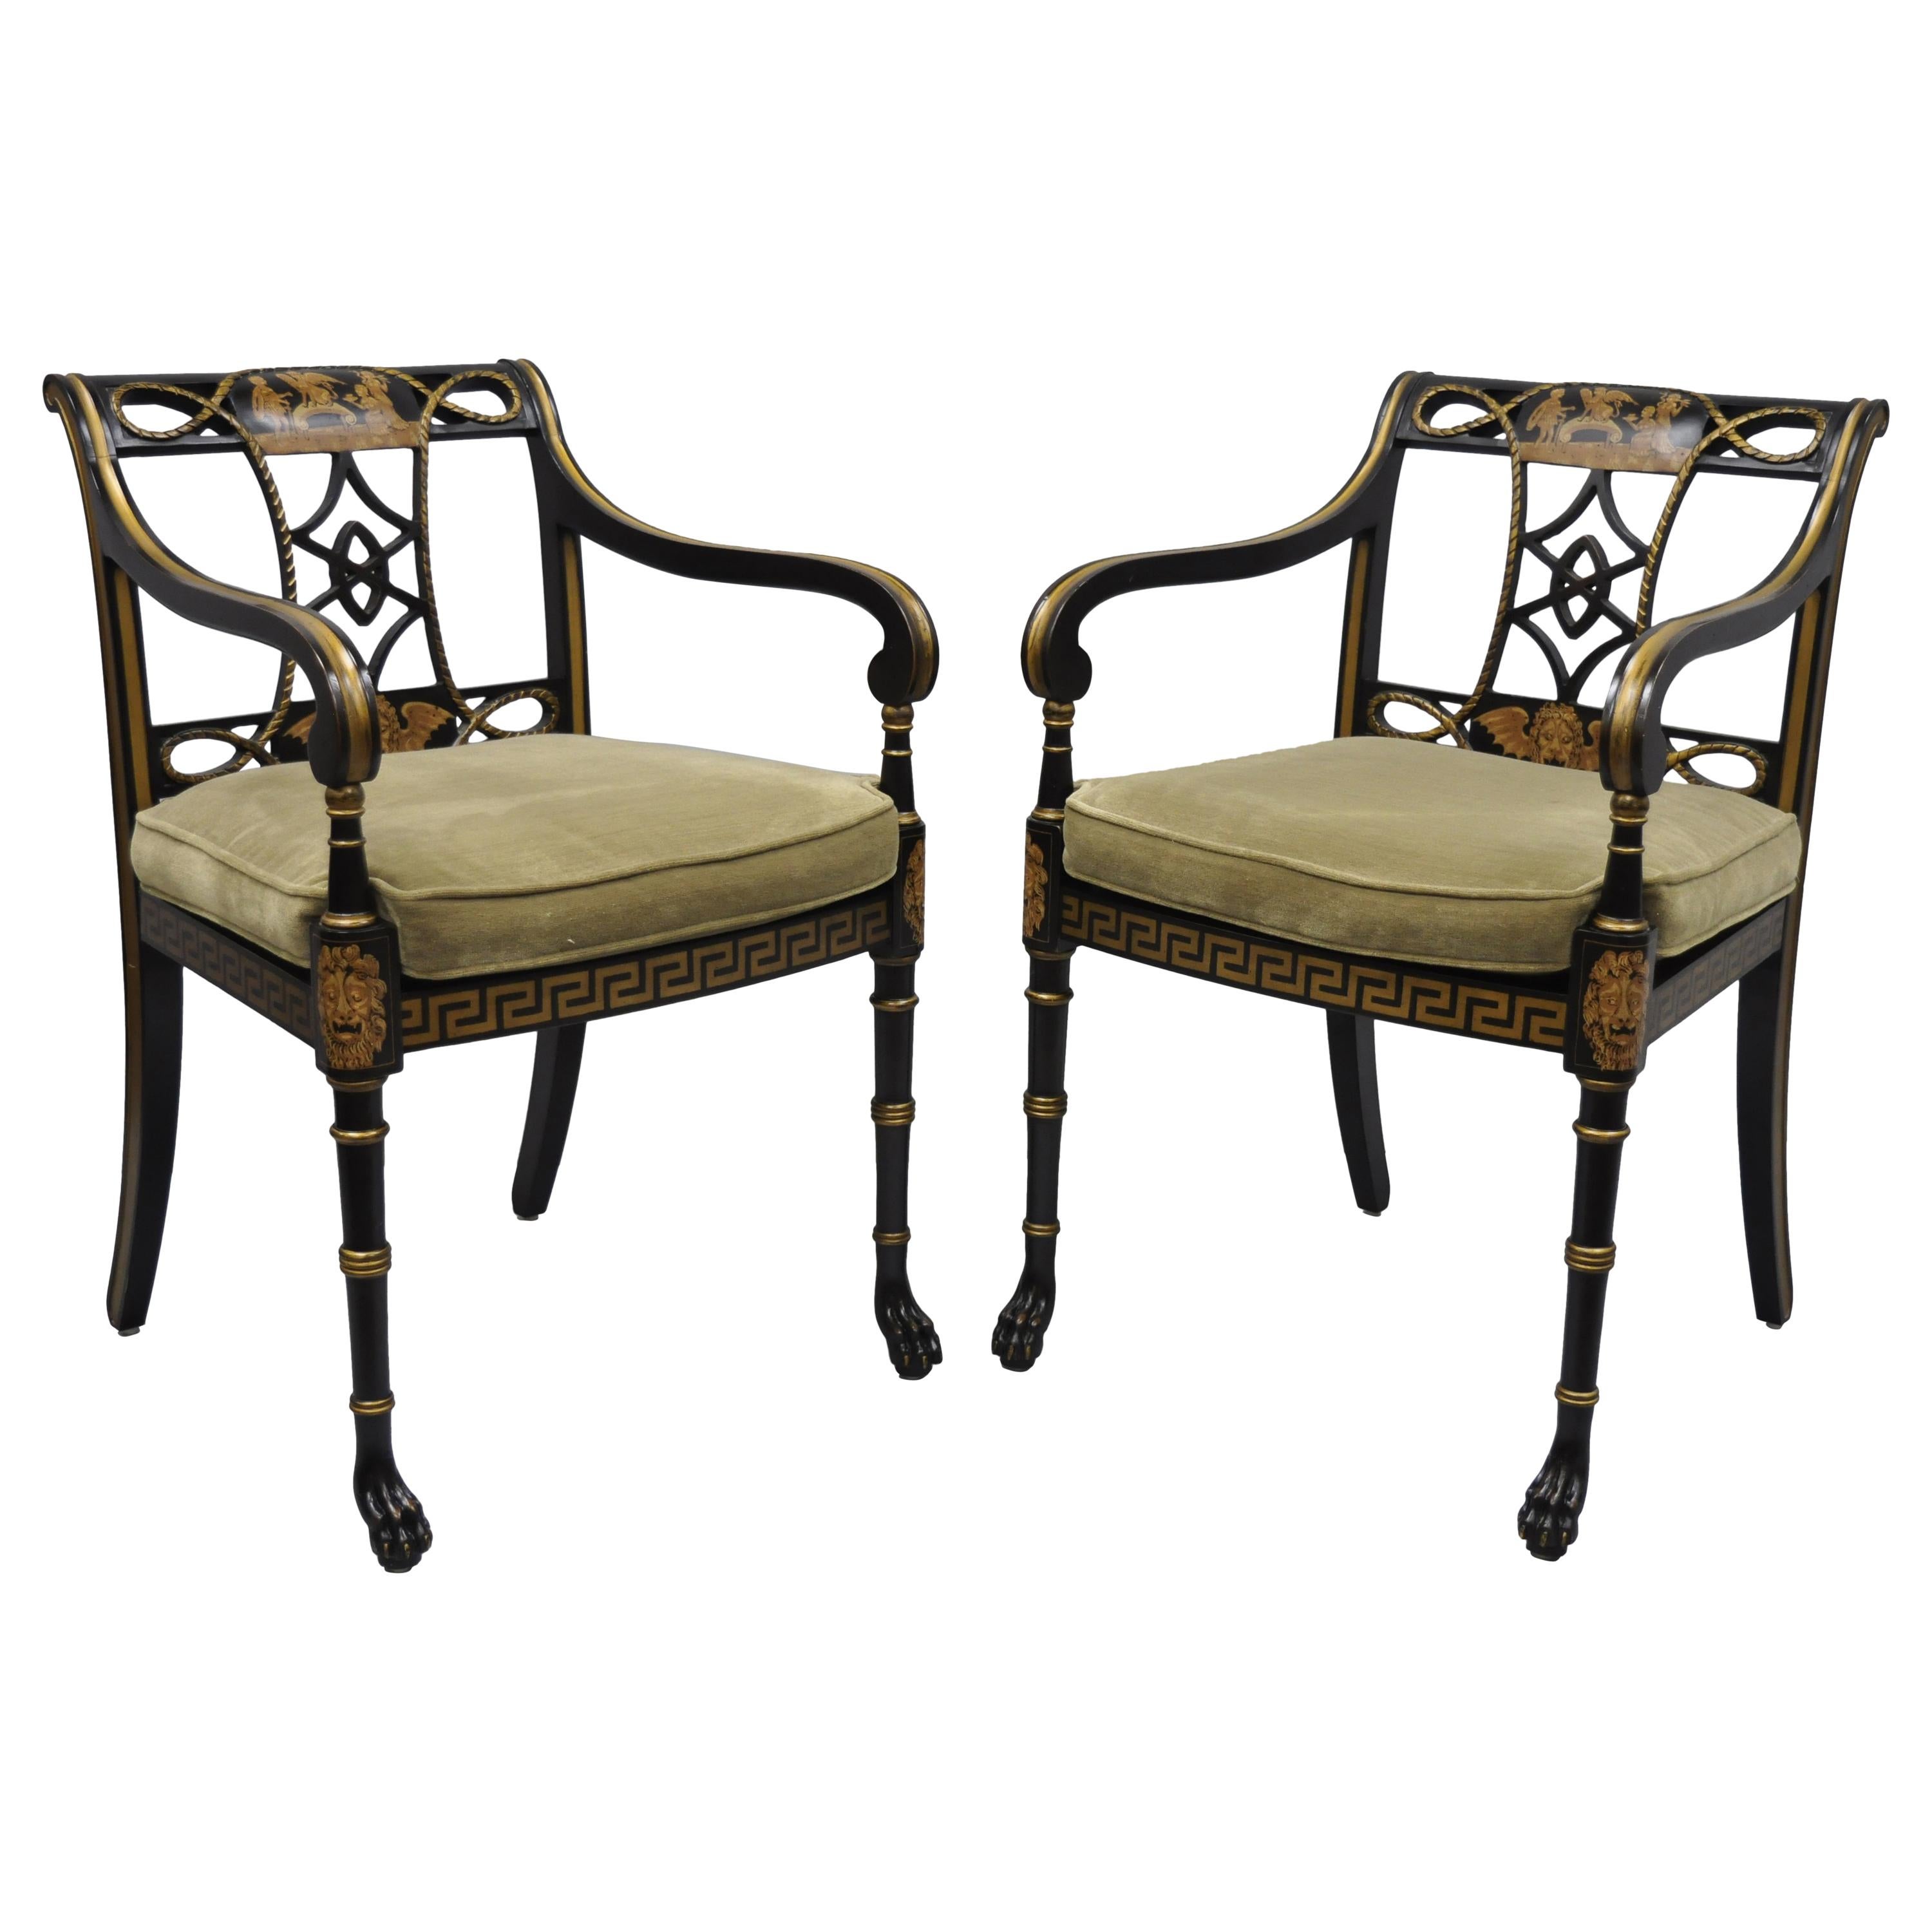 20th Century Black and Gold English Regency Style Greek Key Paw Foot Armchairs